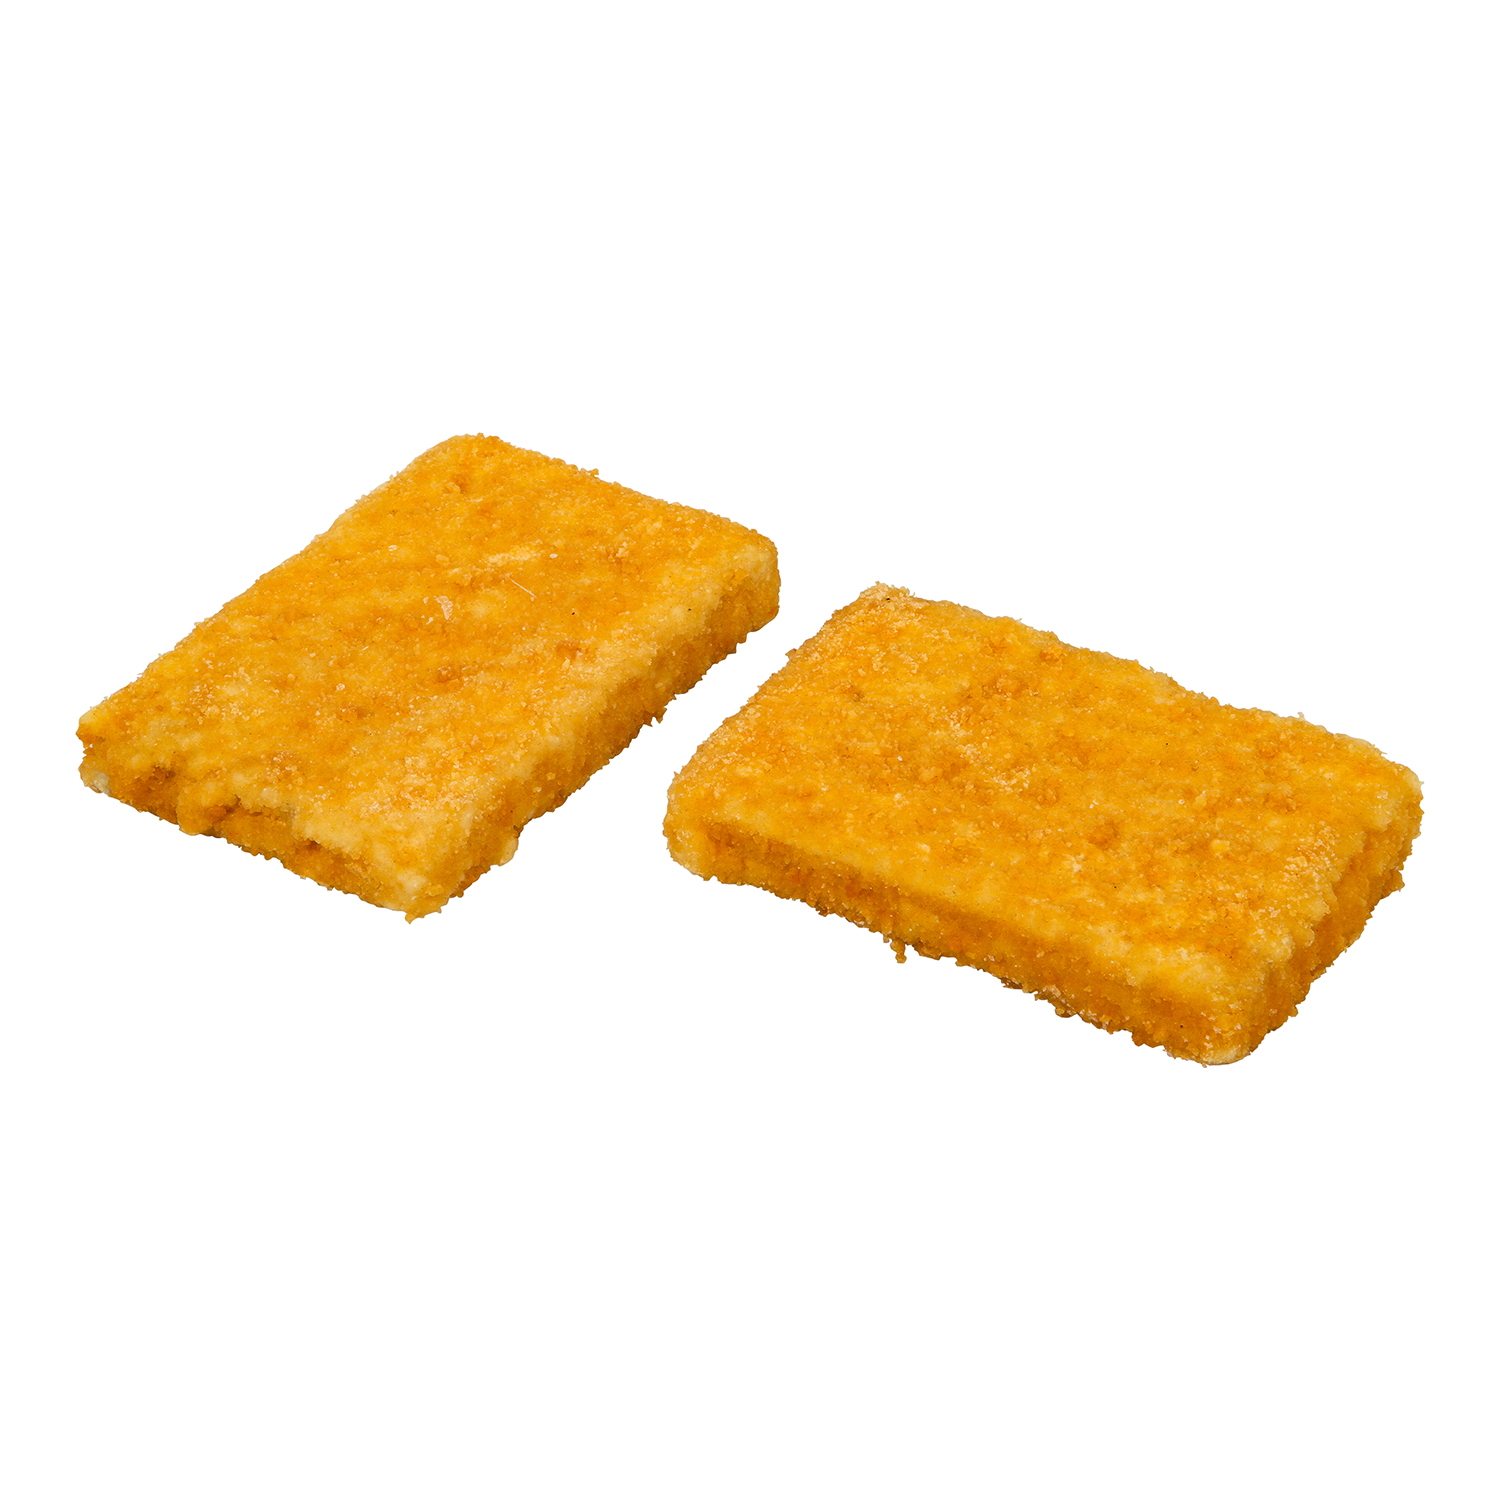 1 10 Lb Oven Ready Breaded Haddock Rectangles 3 Oz Cn Msc High Liner Foods Single Source For Seafood In Foodservice